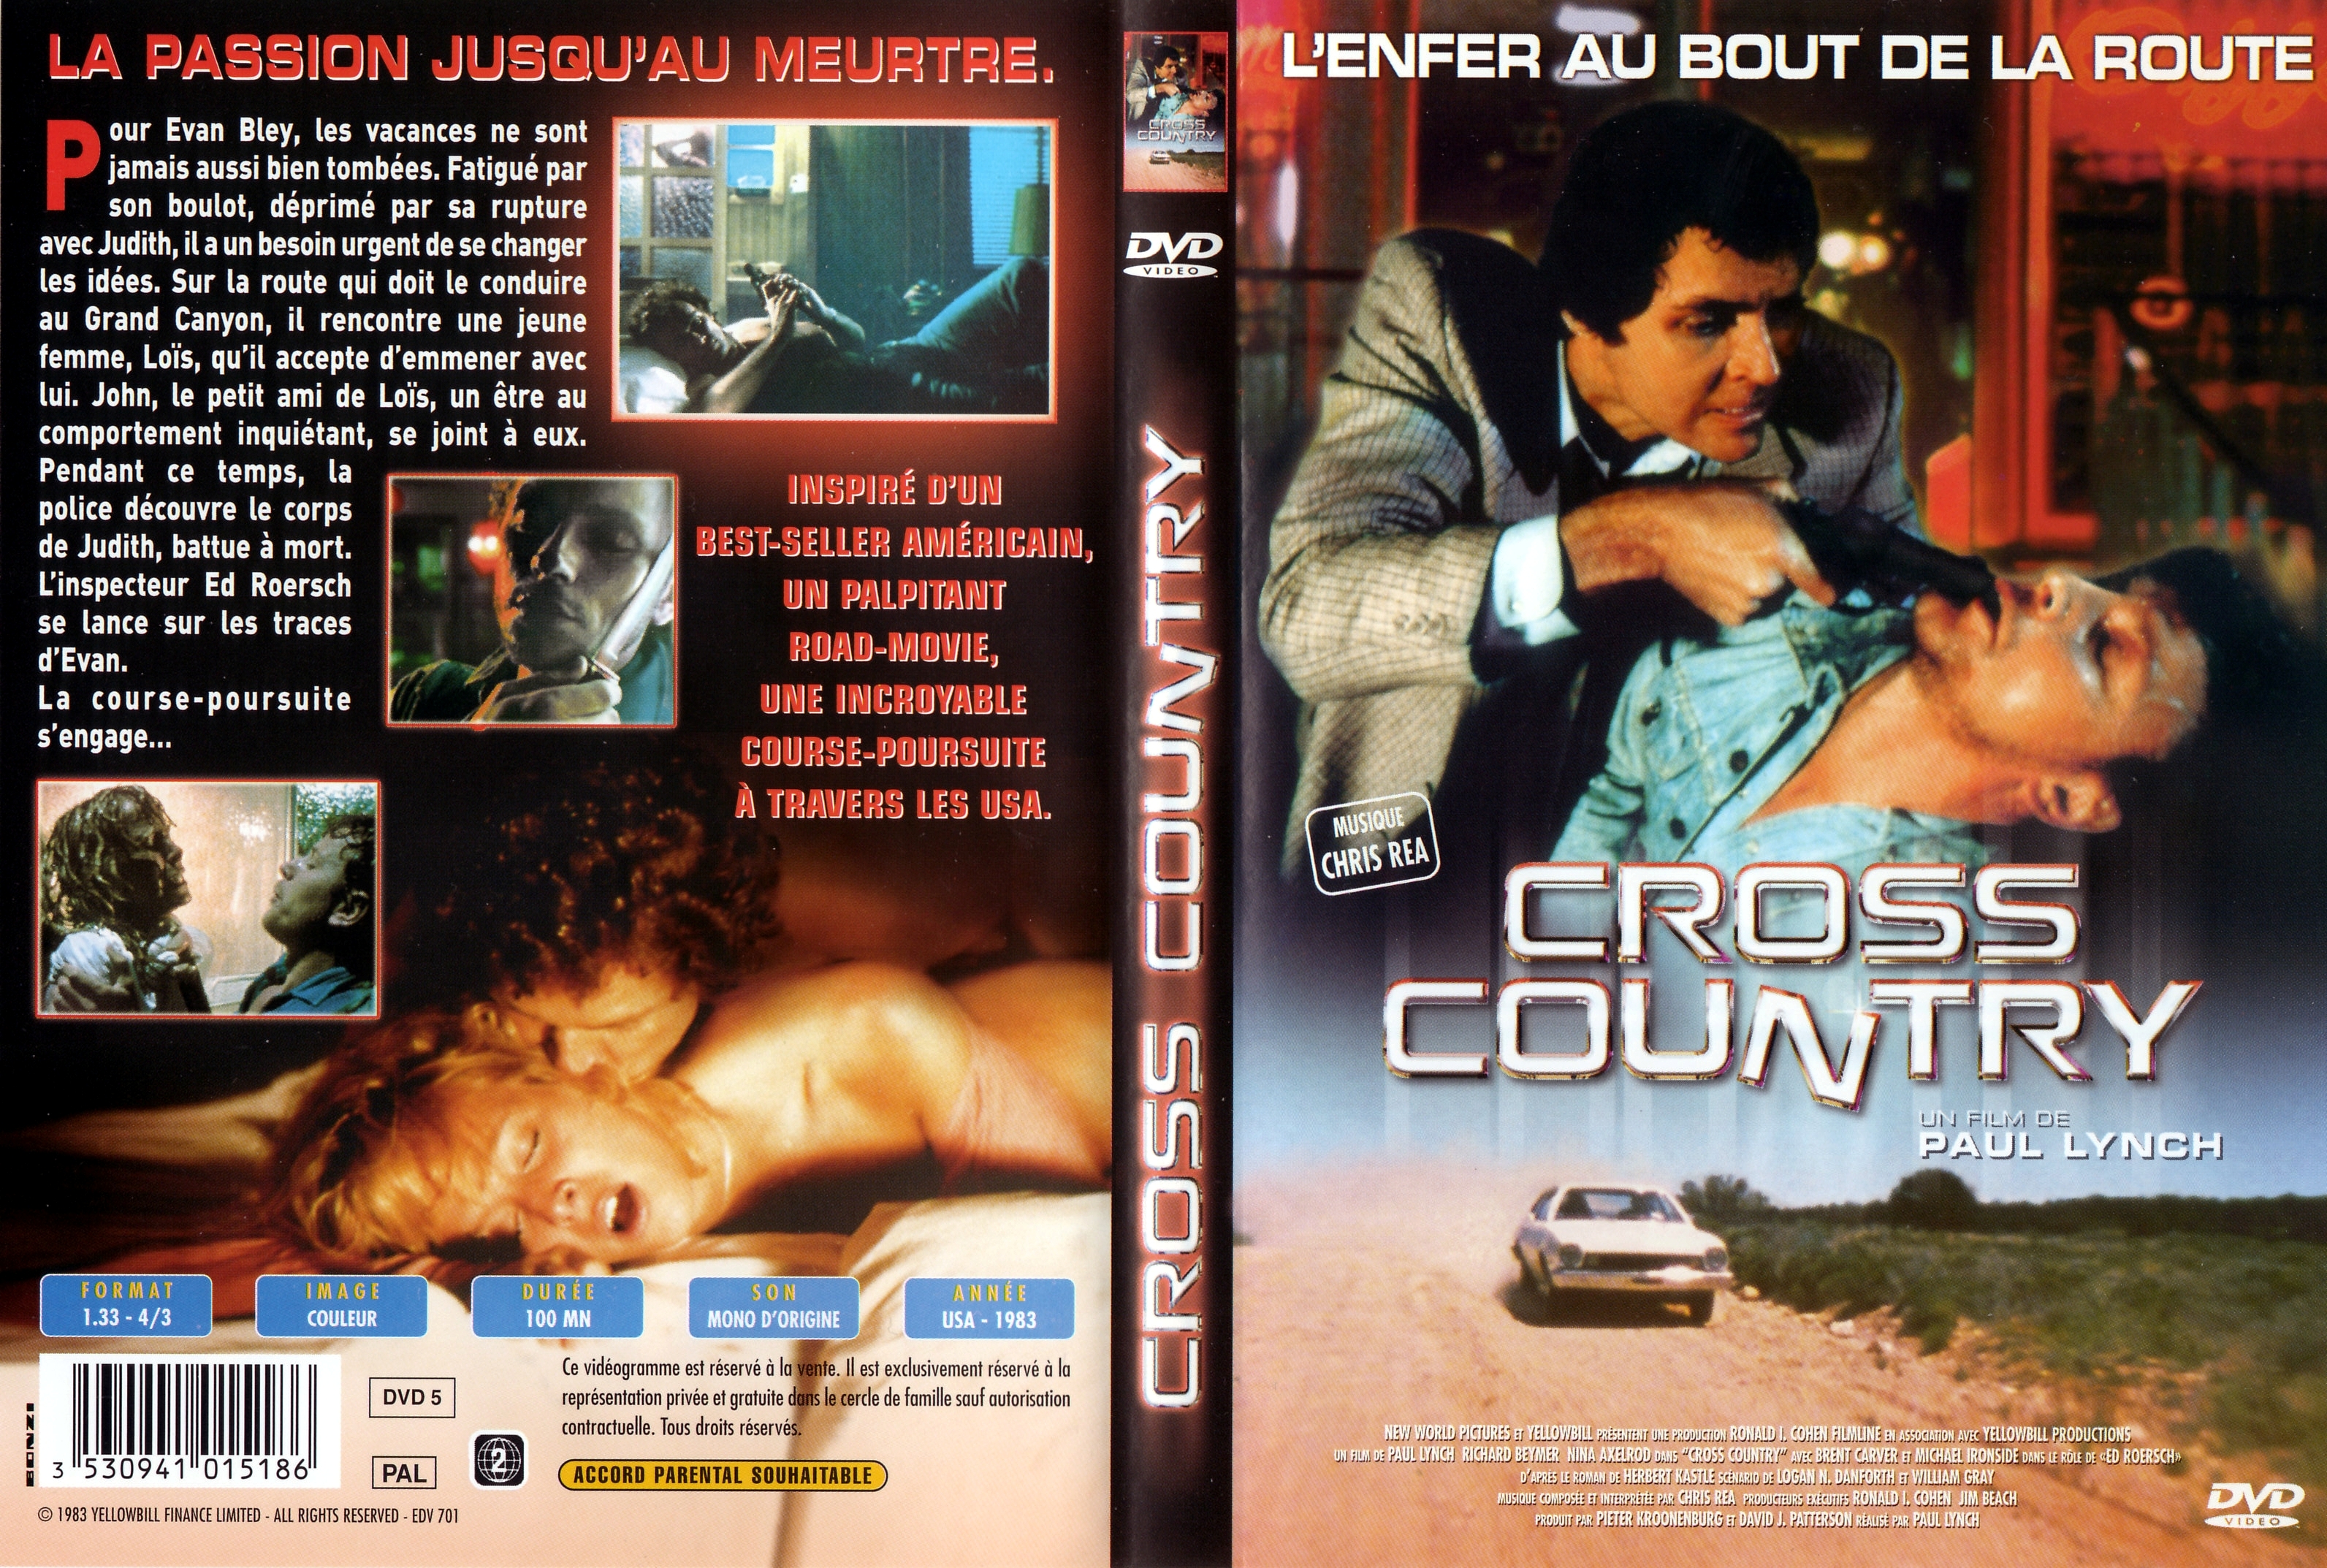 Jaquette DVD Cross country